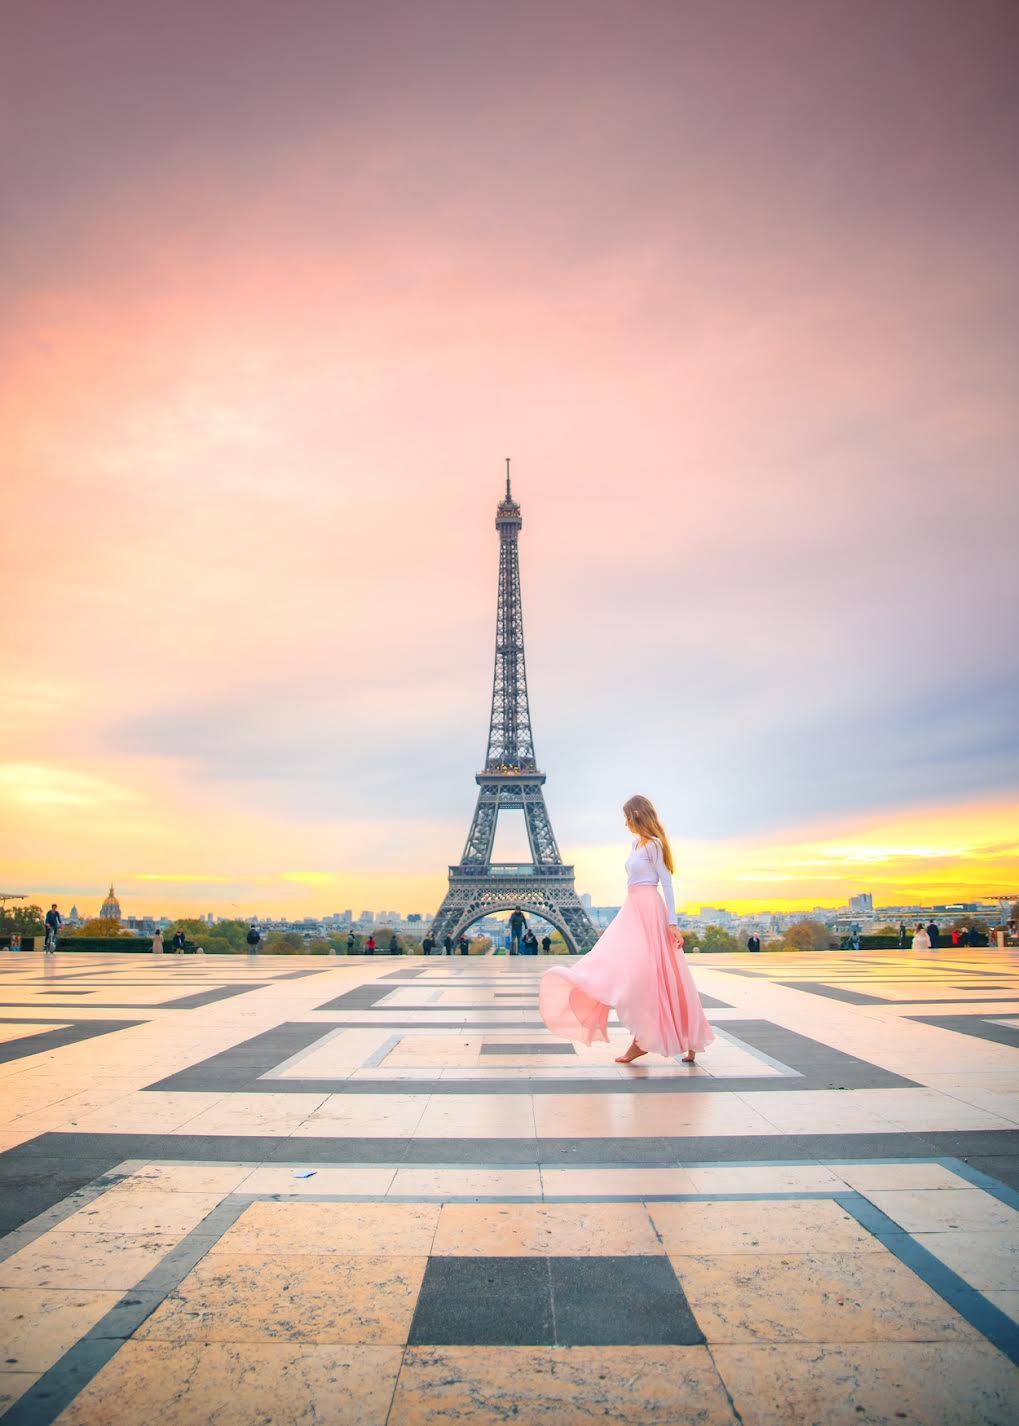 Vivid pink sunset over the Eiffel Tower with a woman in a pink, flowing dress at Place du Trocadero.